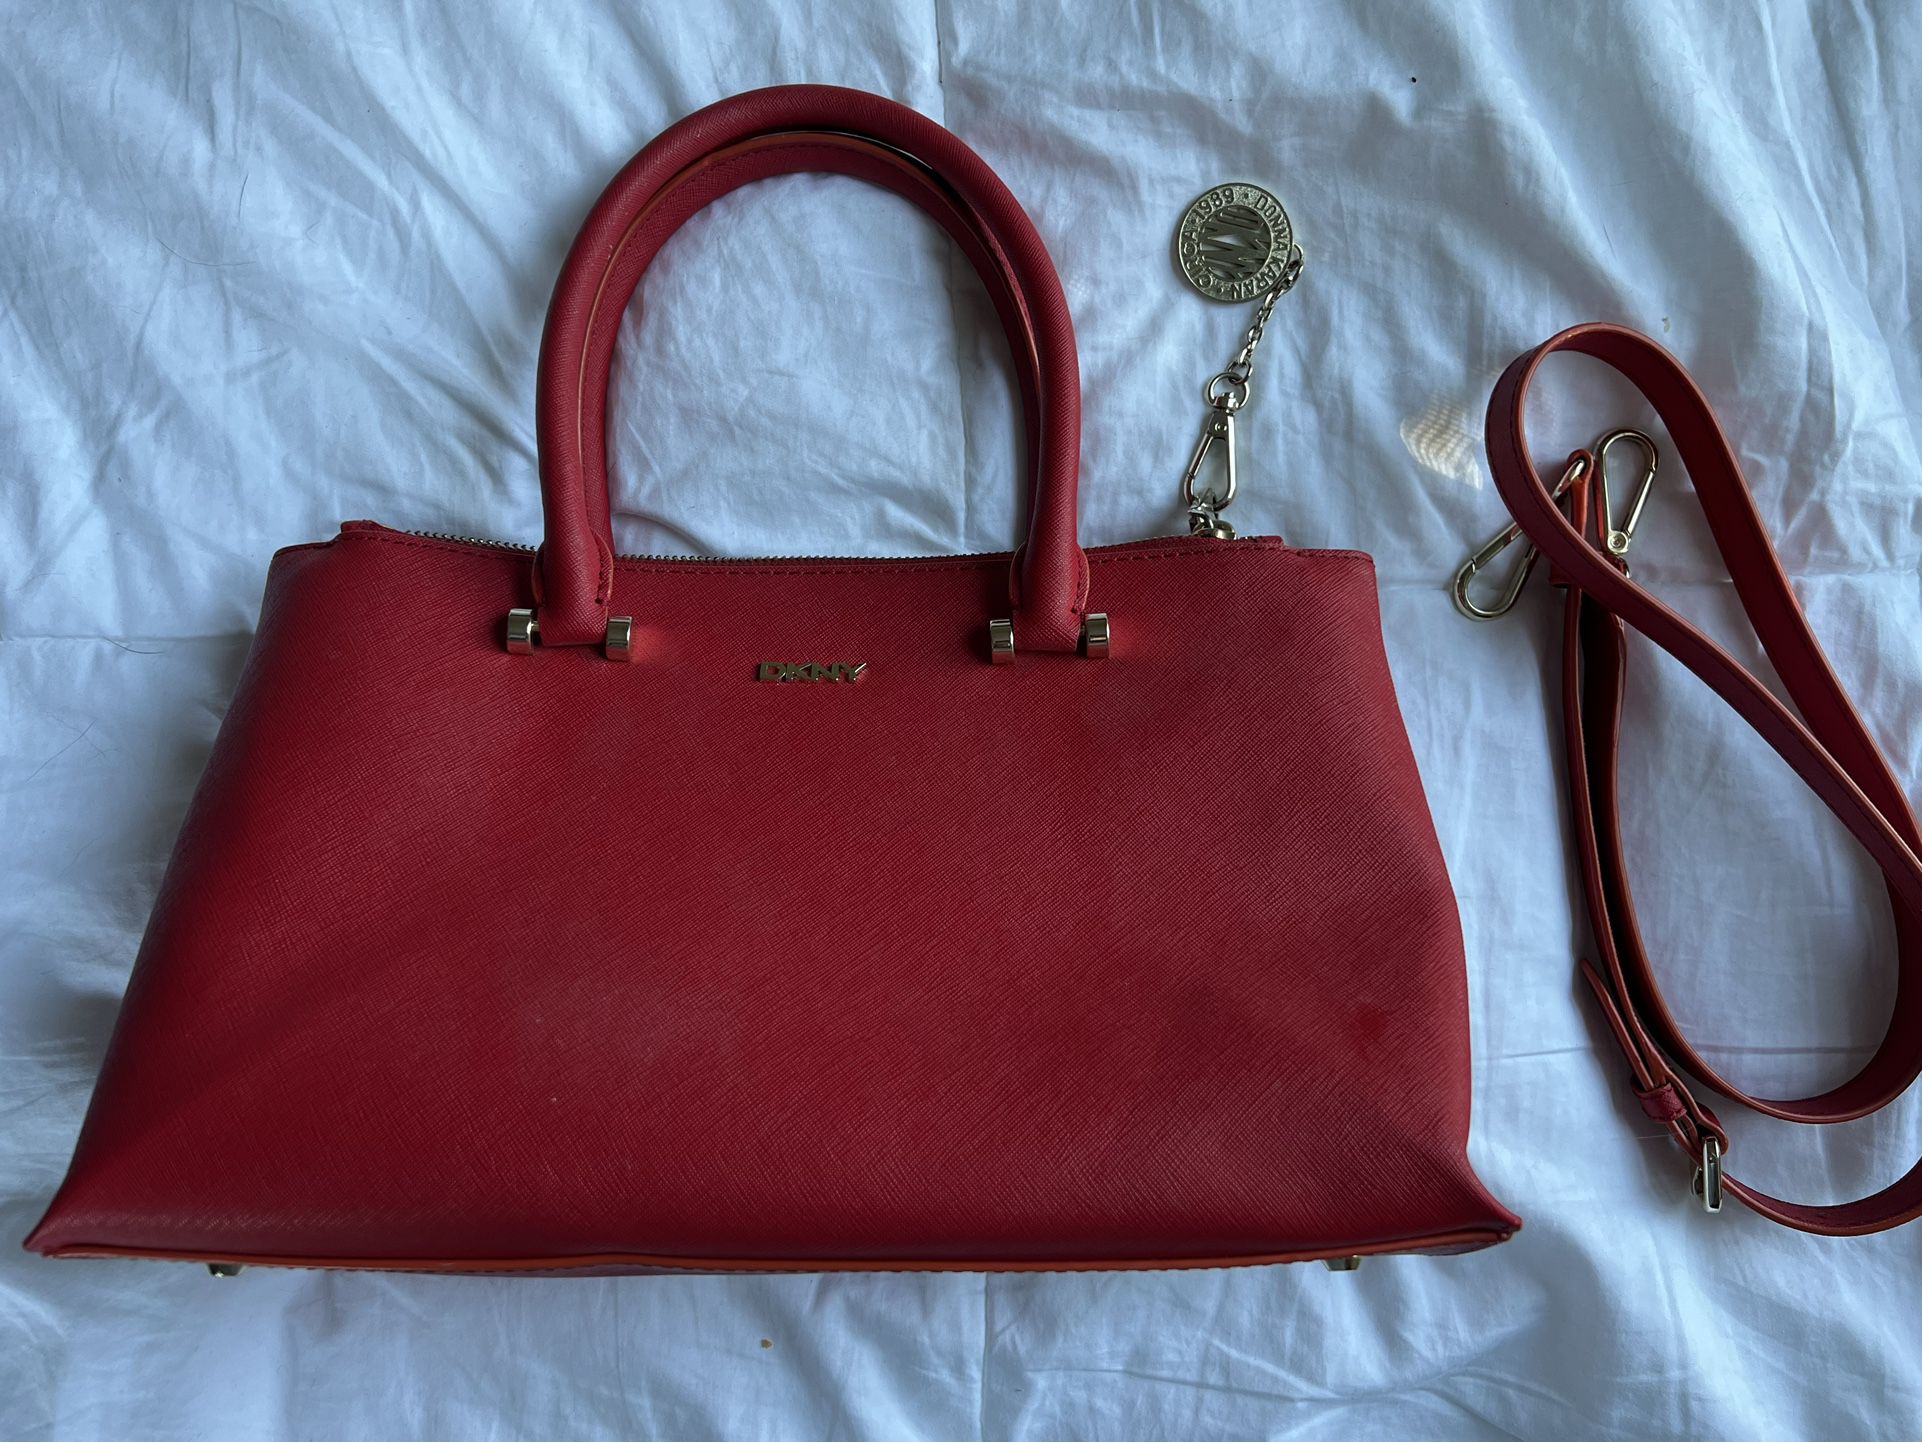 Dkny Purse Red Saffiano Leather Double Zip Tote